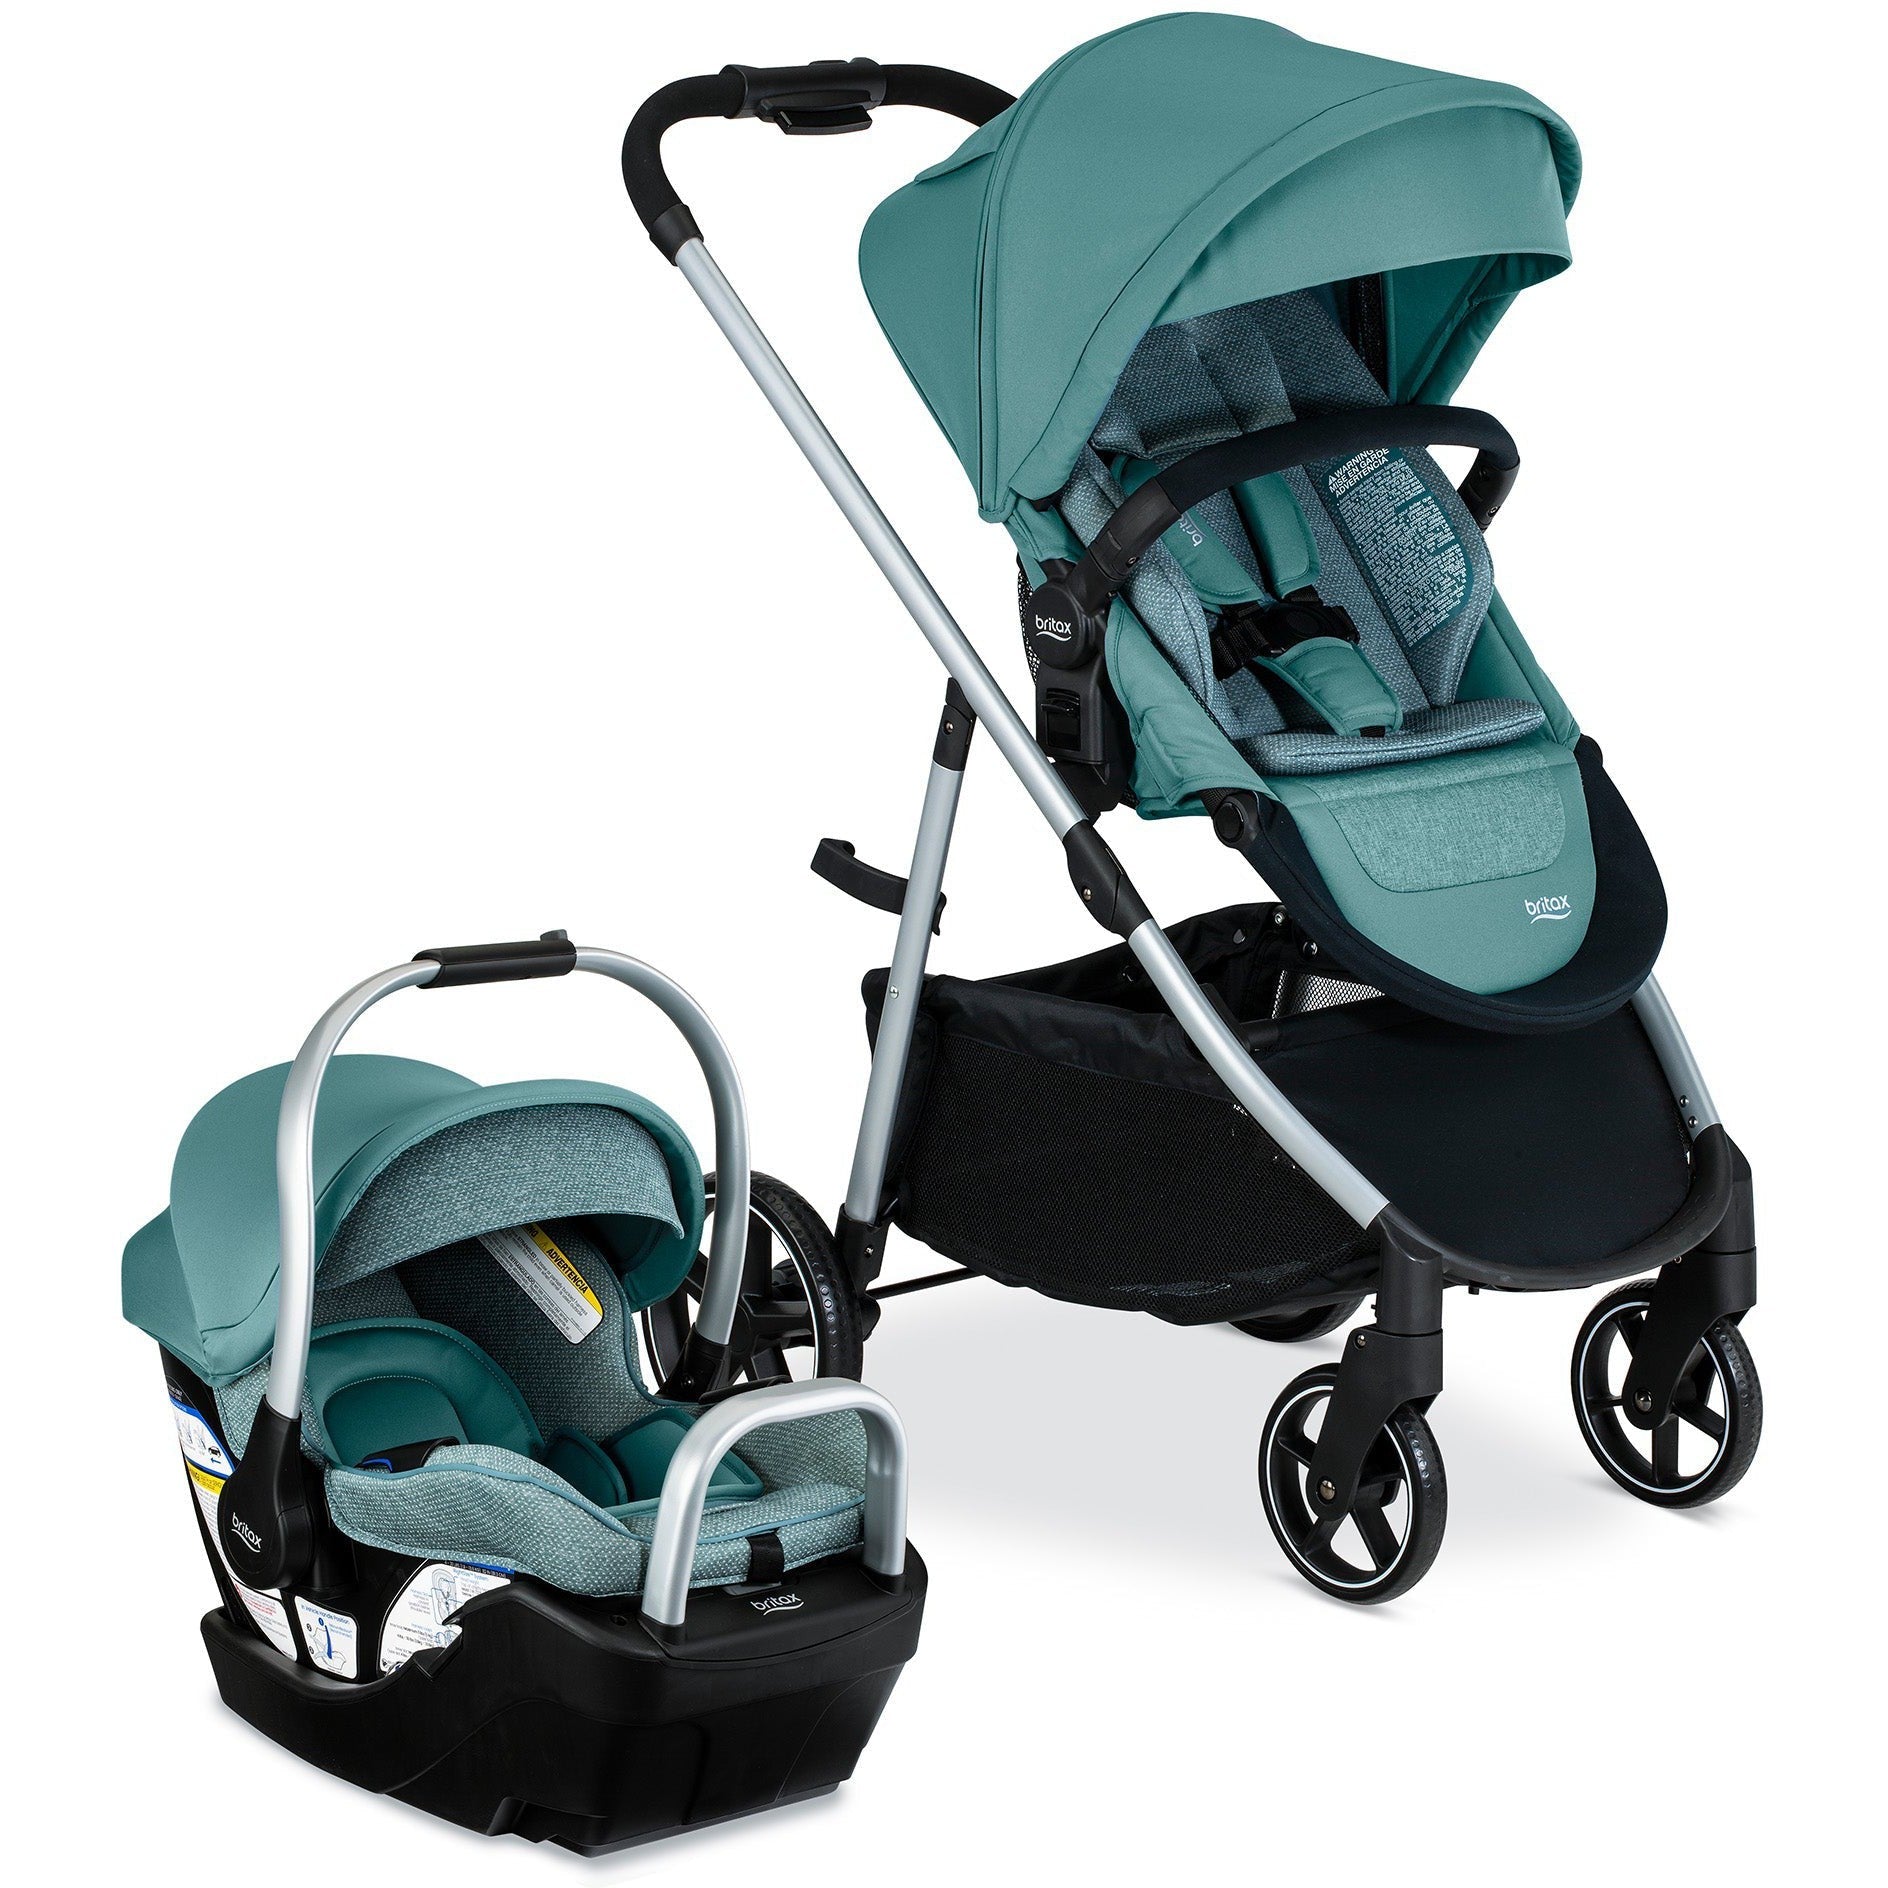 Britax Willow Grove Travel System